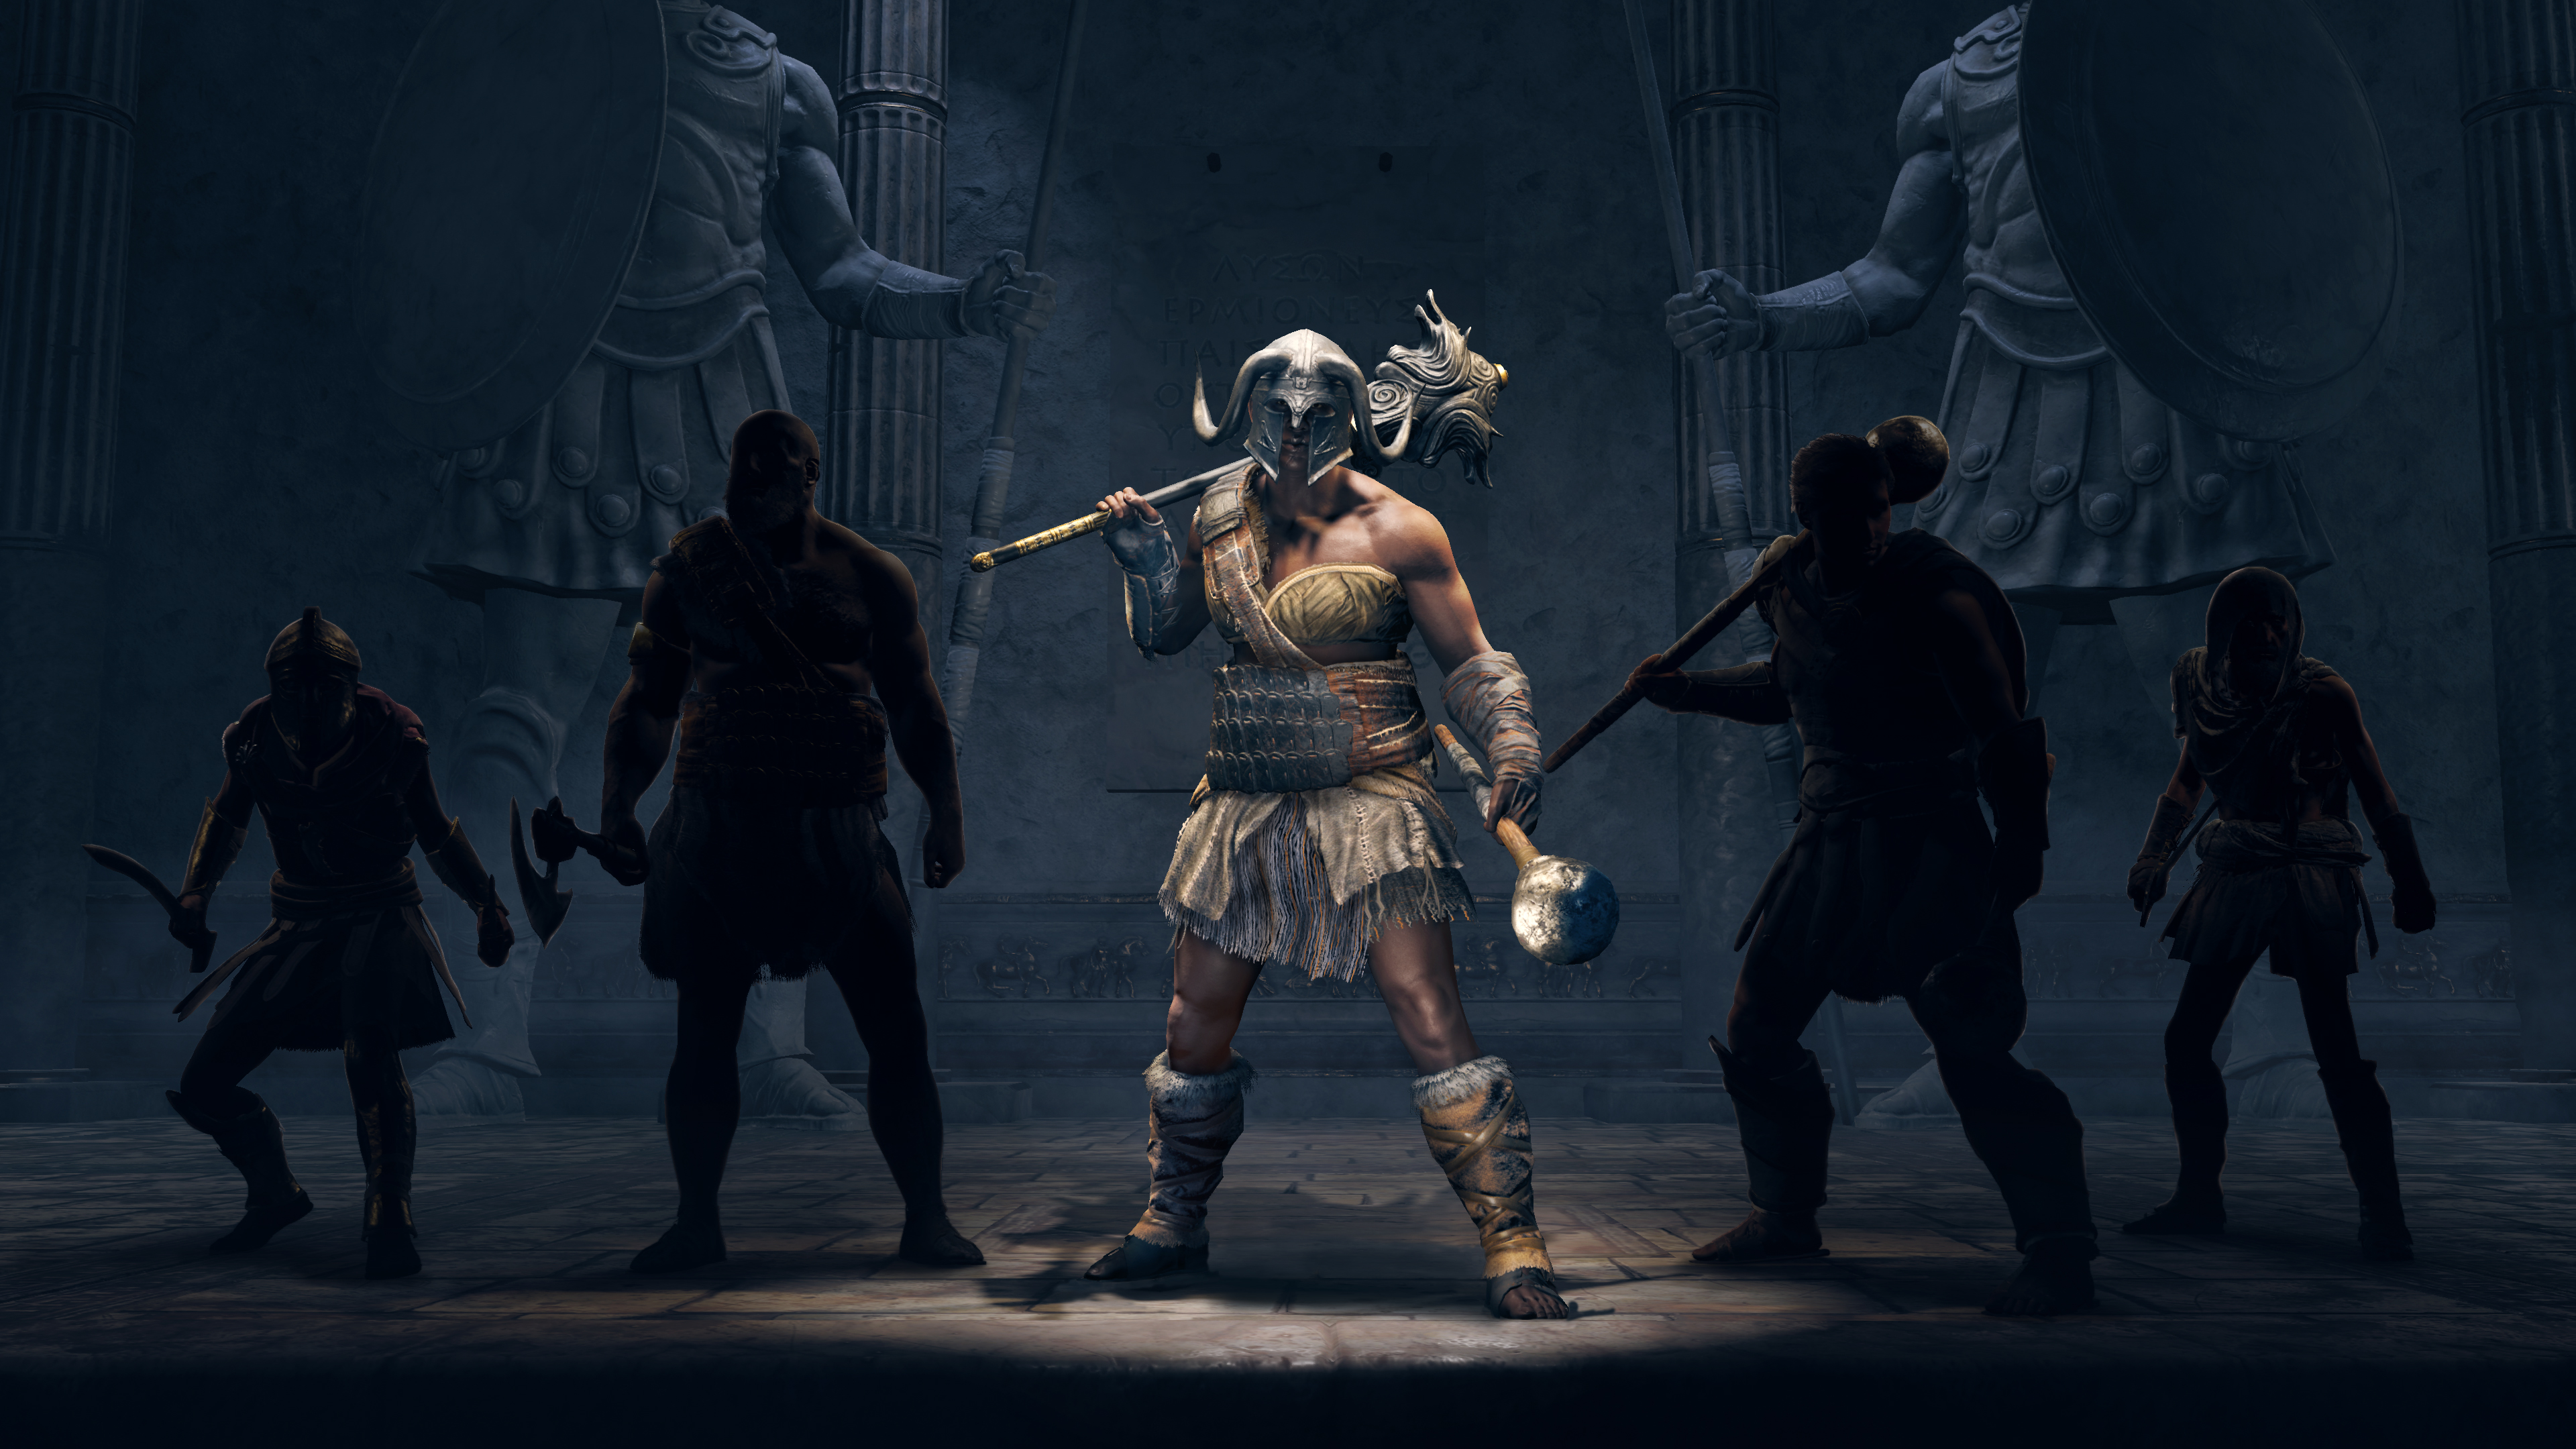 Twitch Prime Members Can Unlock Sweet Assassin's Creed Odyssey Loot